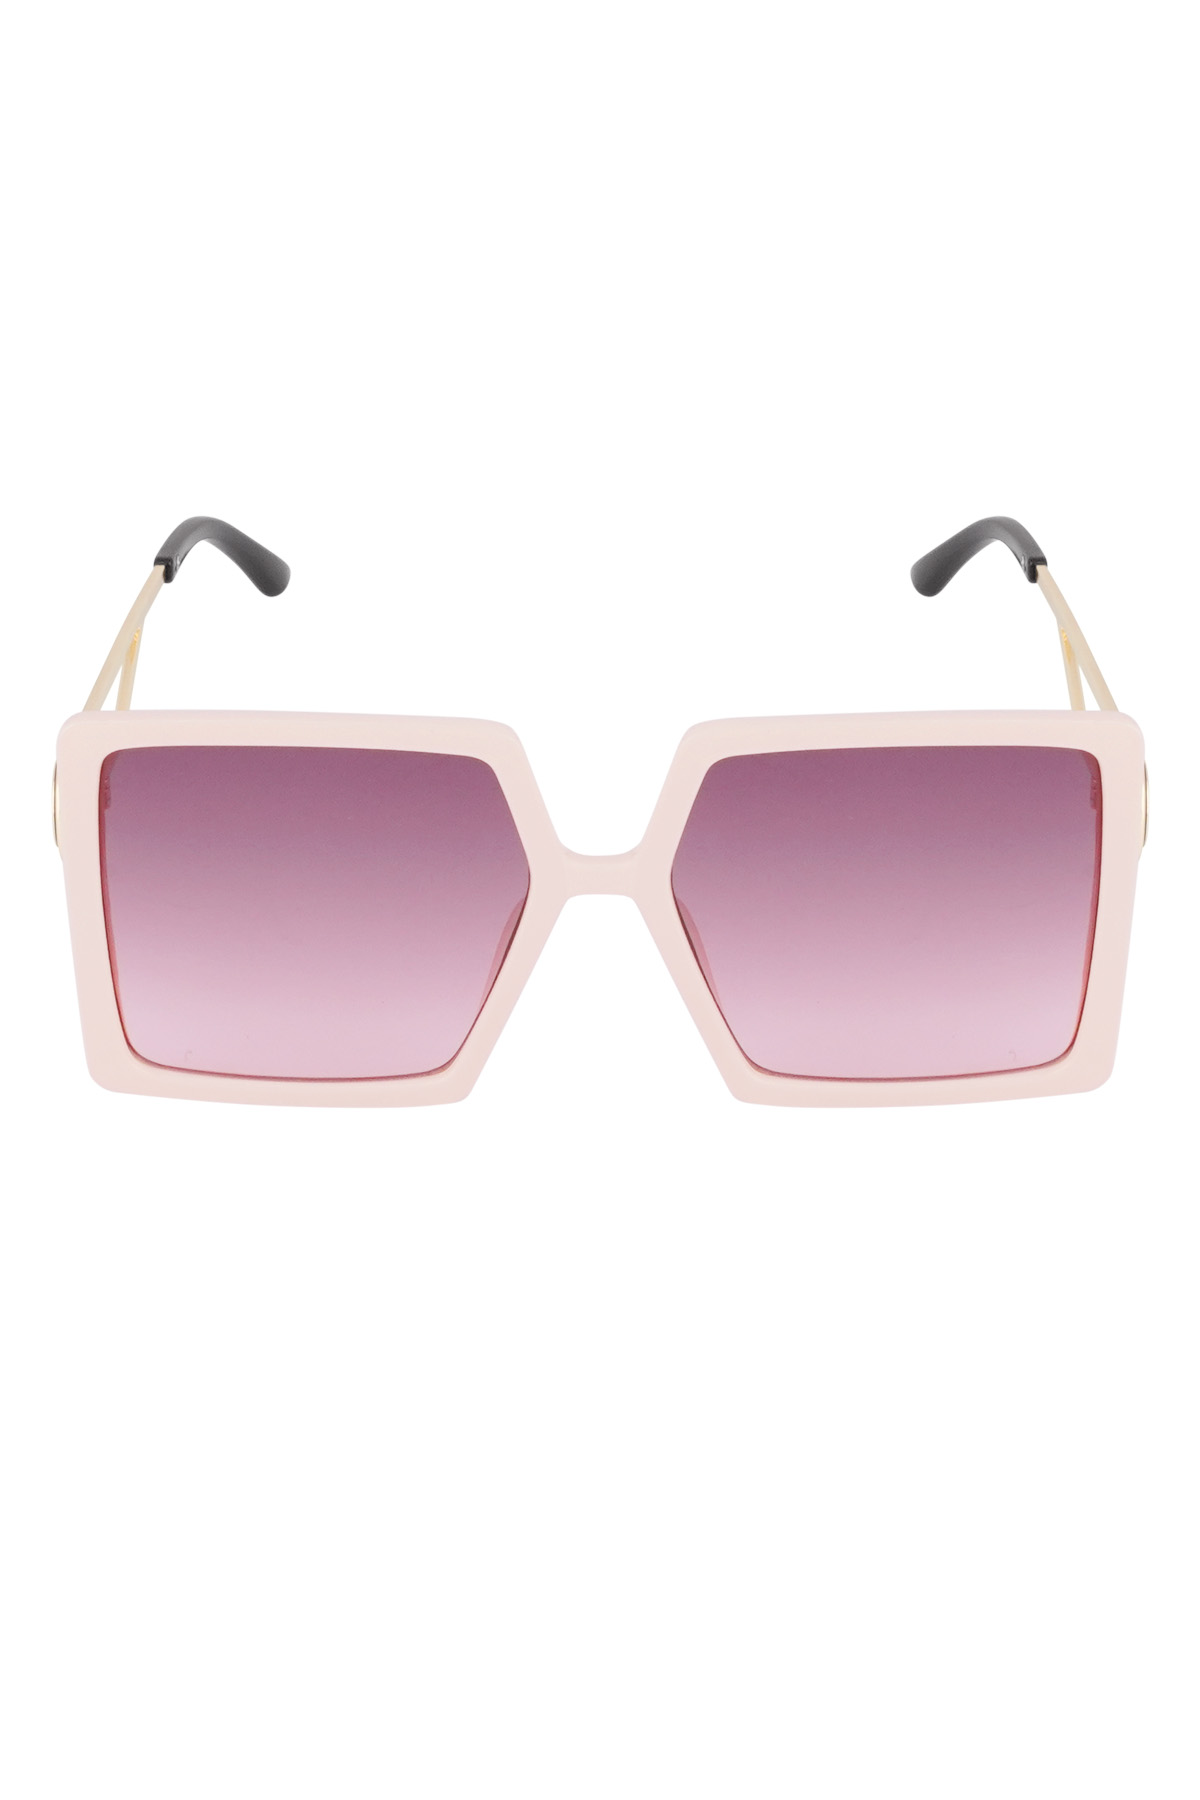 Summer statement sunglasses - pink  h5 Picture4